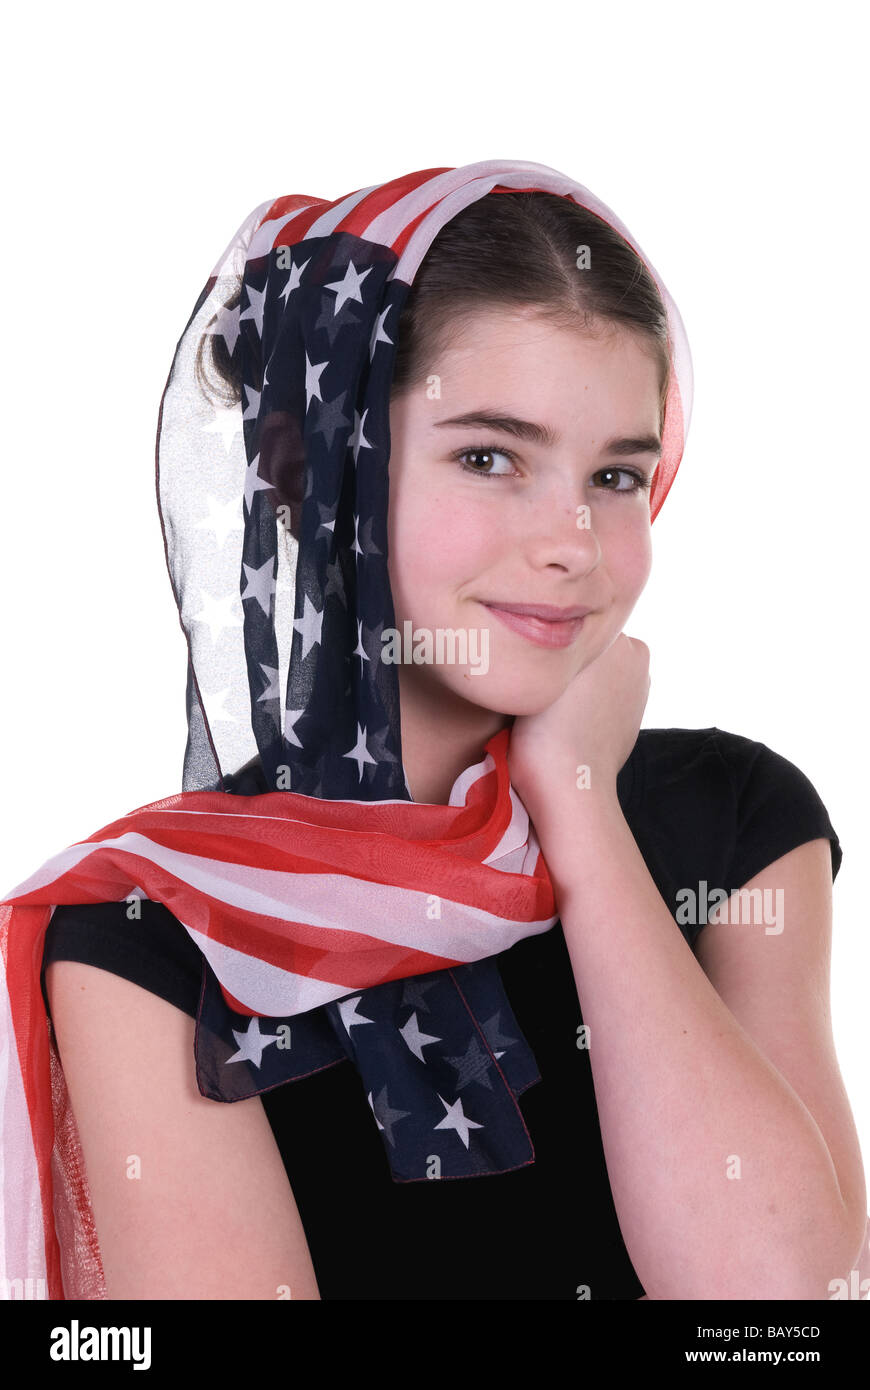 A young girl poses innocently with an American scarf covering her head Stock Photo